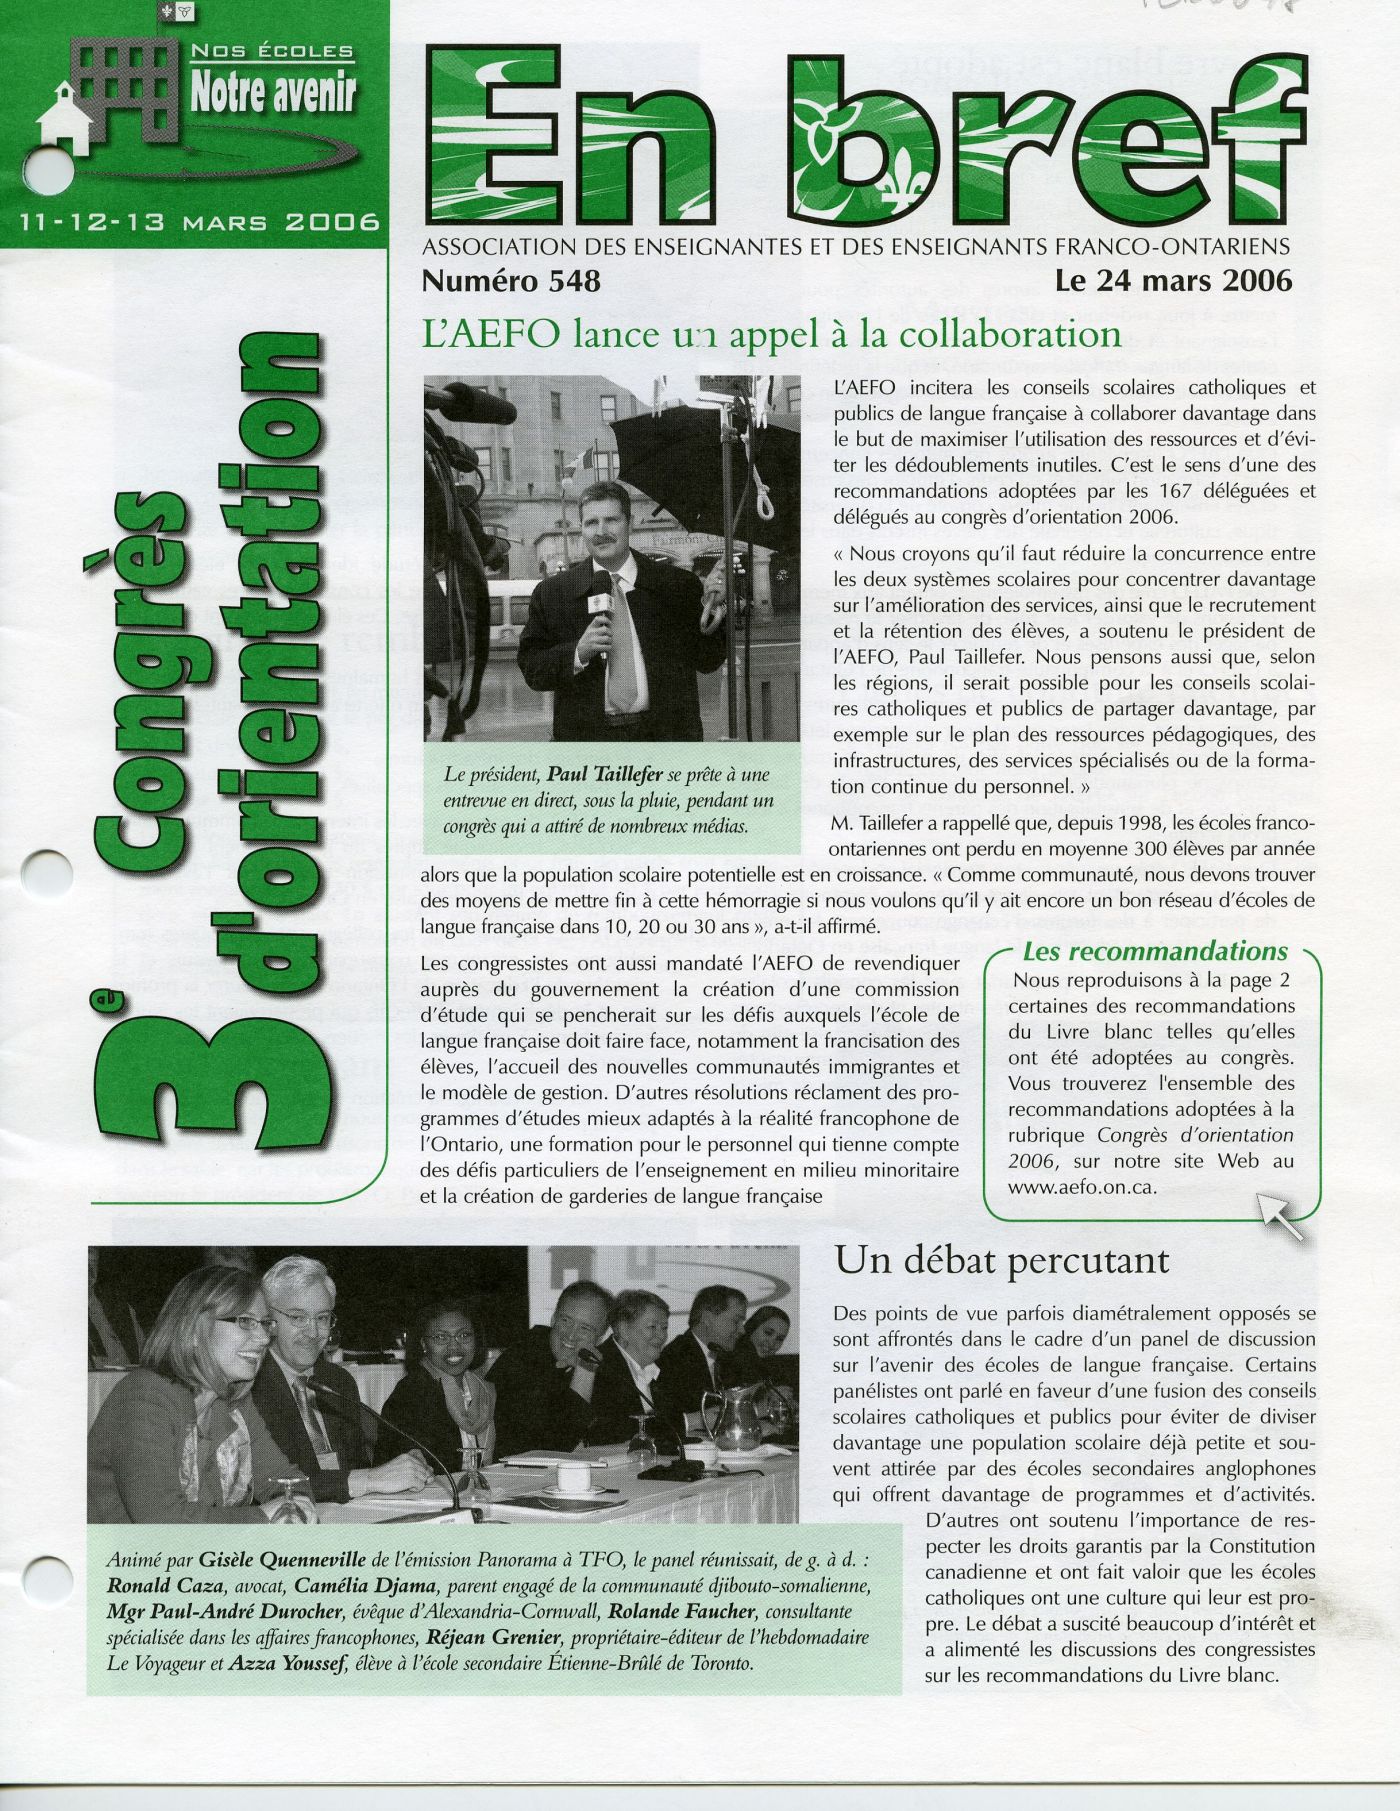 Colour photograph of the first page of a French newsletter, including text and photos. On the left, oriented vertically in green letters, the main topic of this issue of the newsletter: the “3e congrès d’orientation” (3rd orientation assembly). The layout is irregular to capture the reader’s attention.